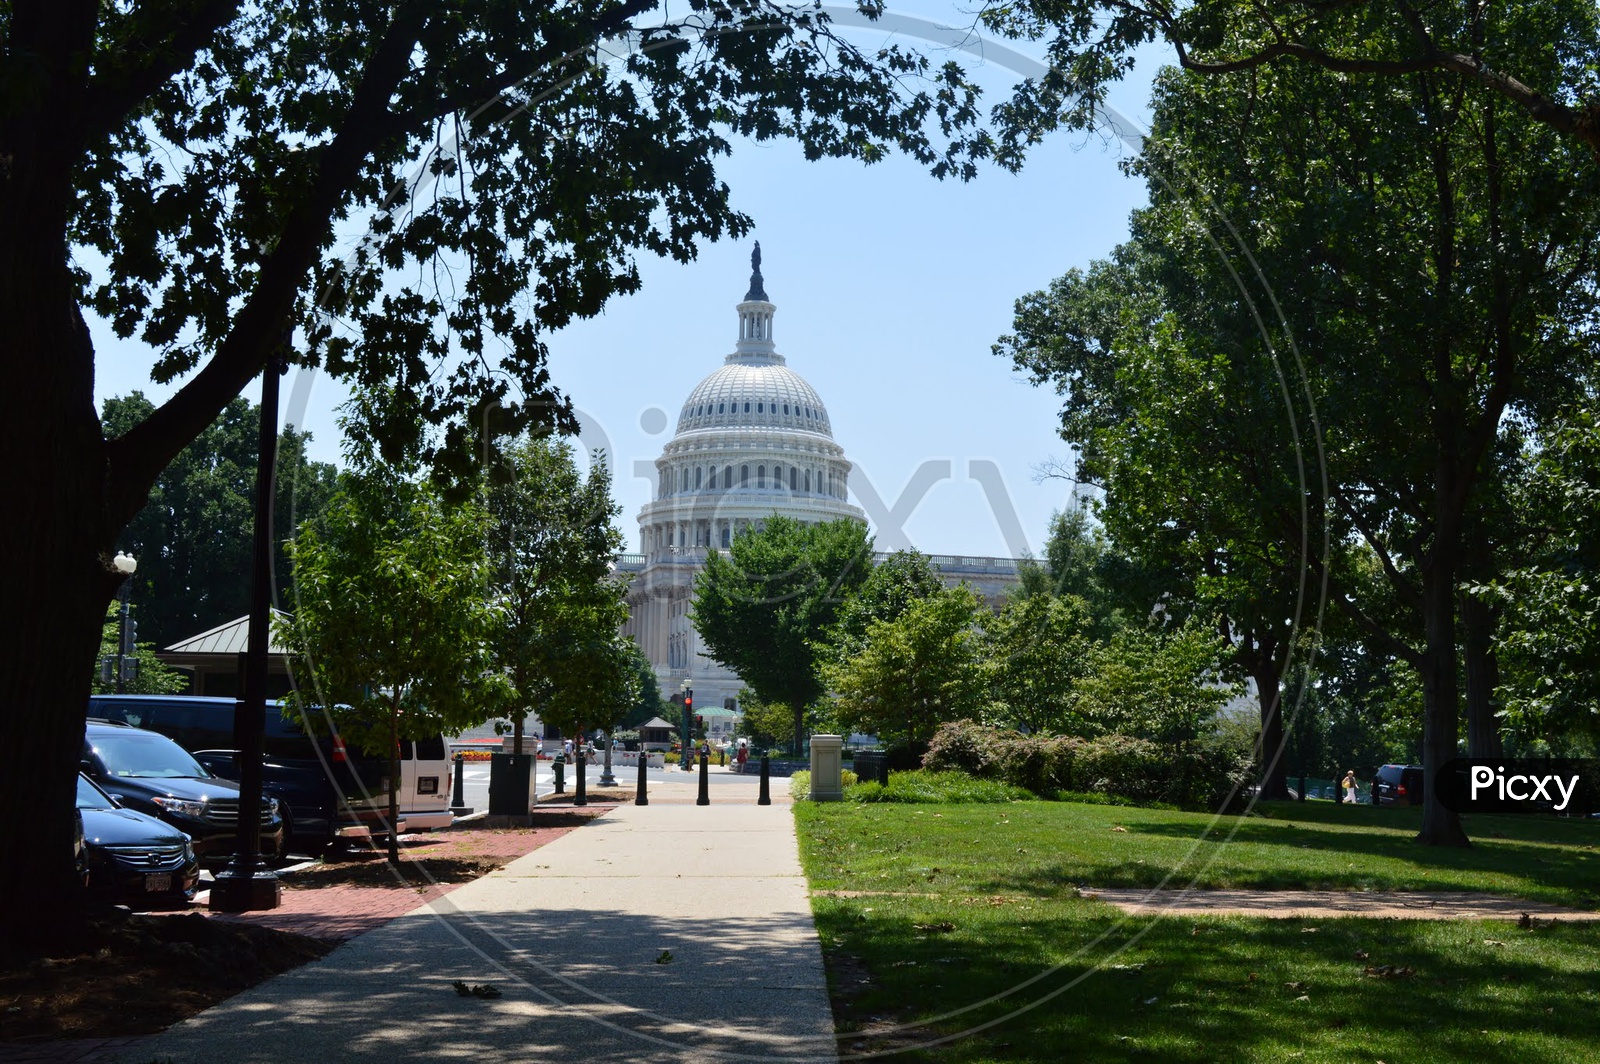 A View Of US Capitol Or Capitol Building  is Home Of  United States Congress  Building